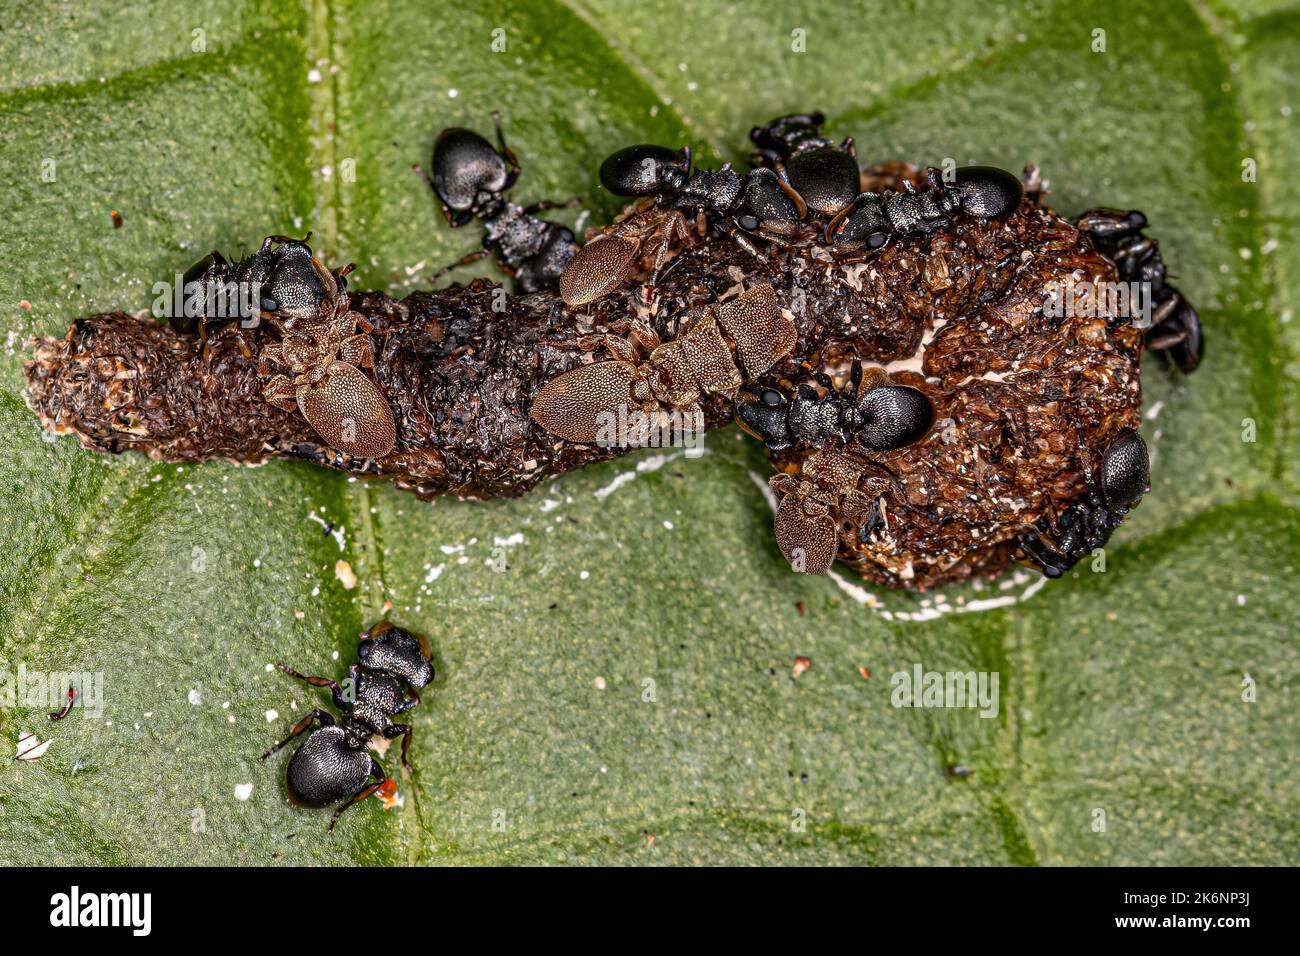 Adult Turtle Ants of the genus Cephalotes eating feces on a leaf Stock Photo